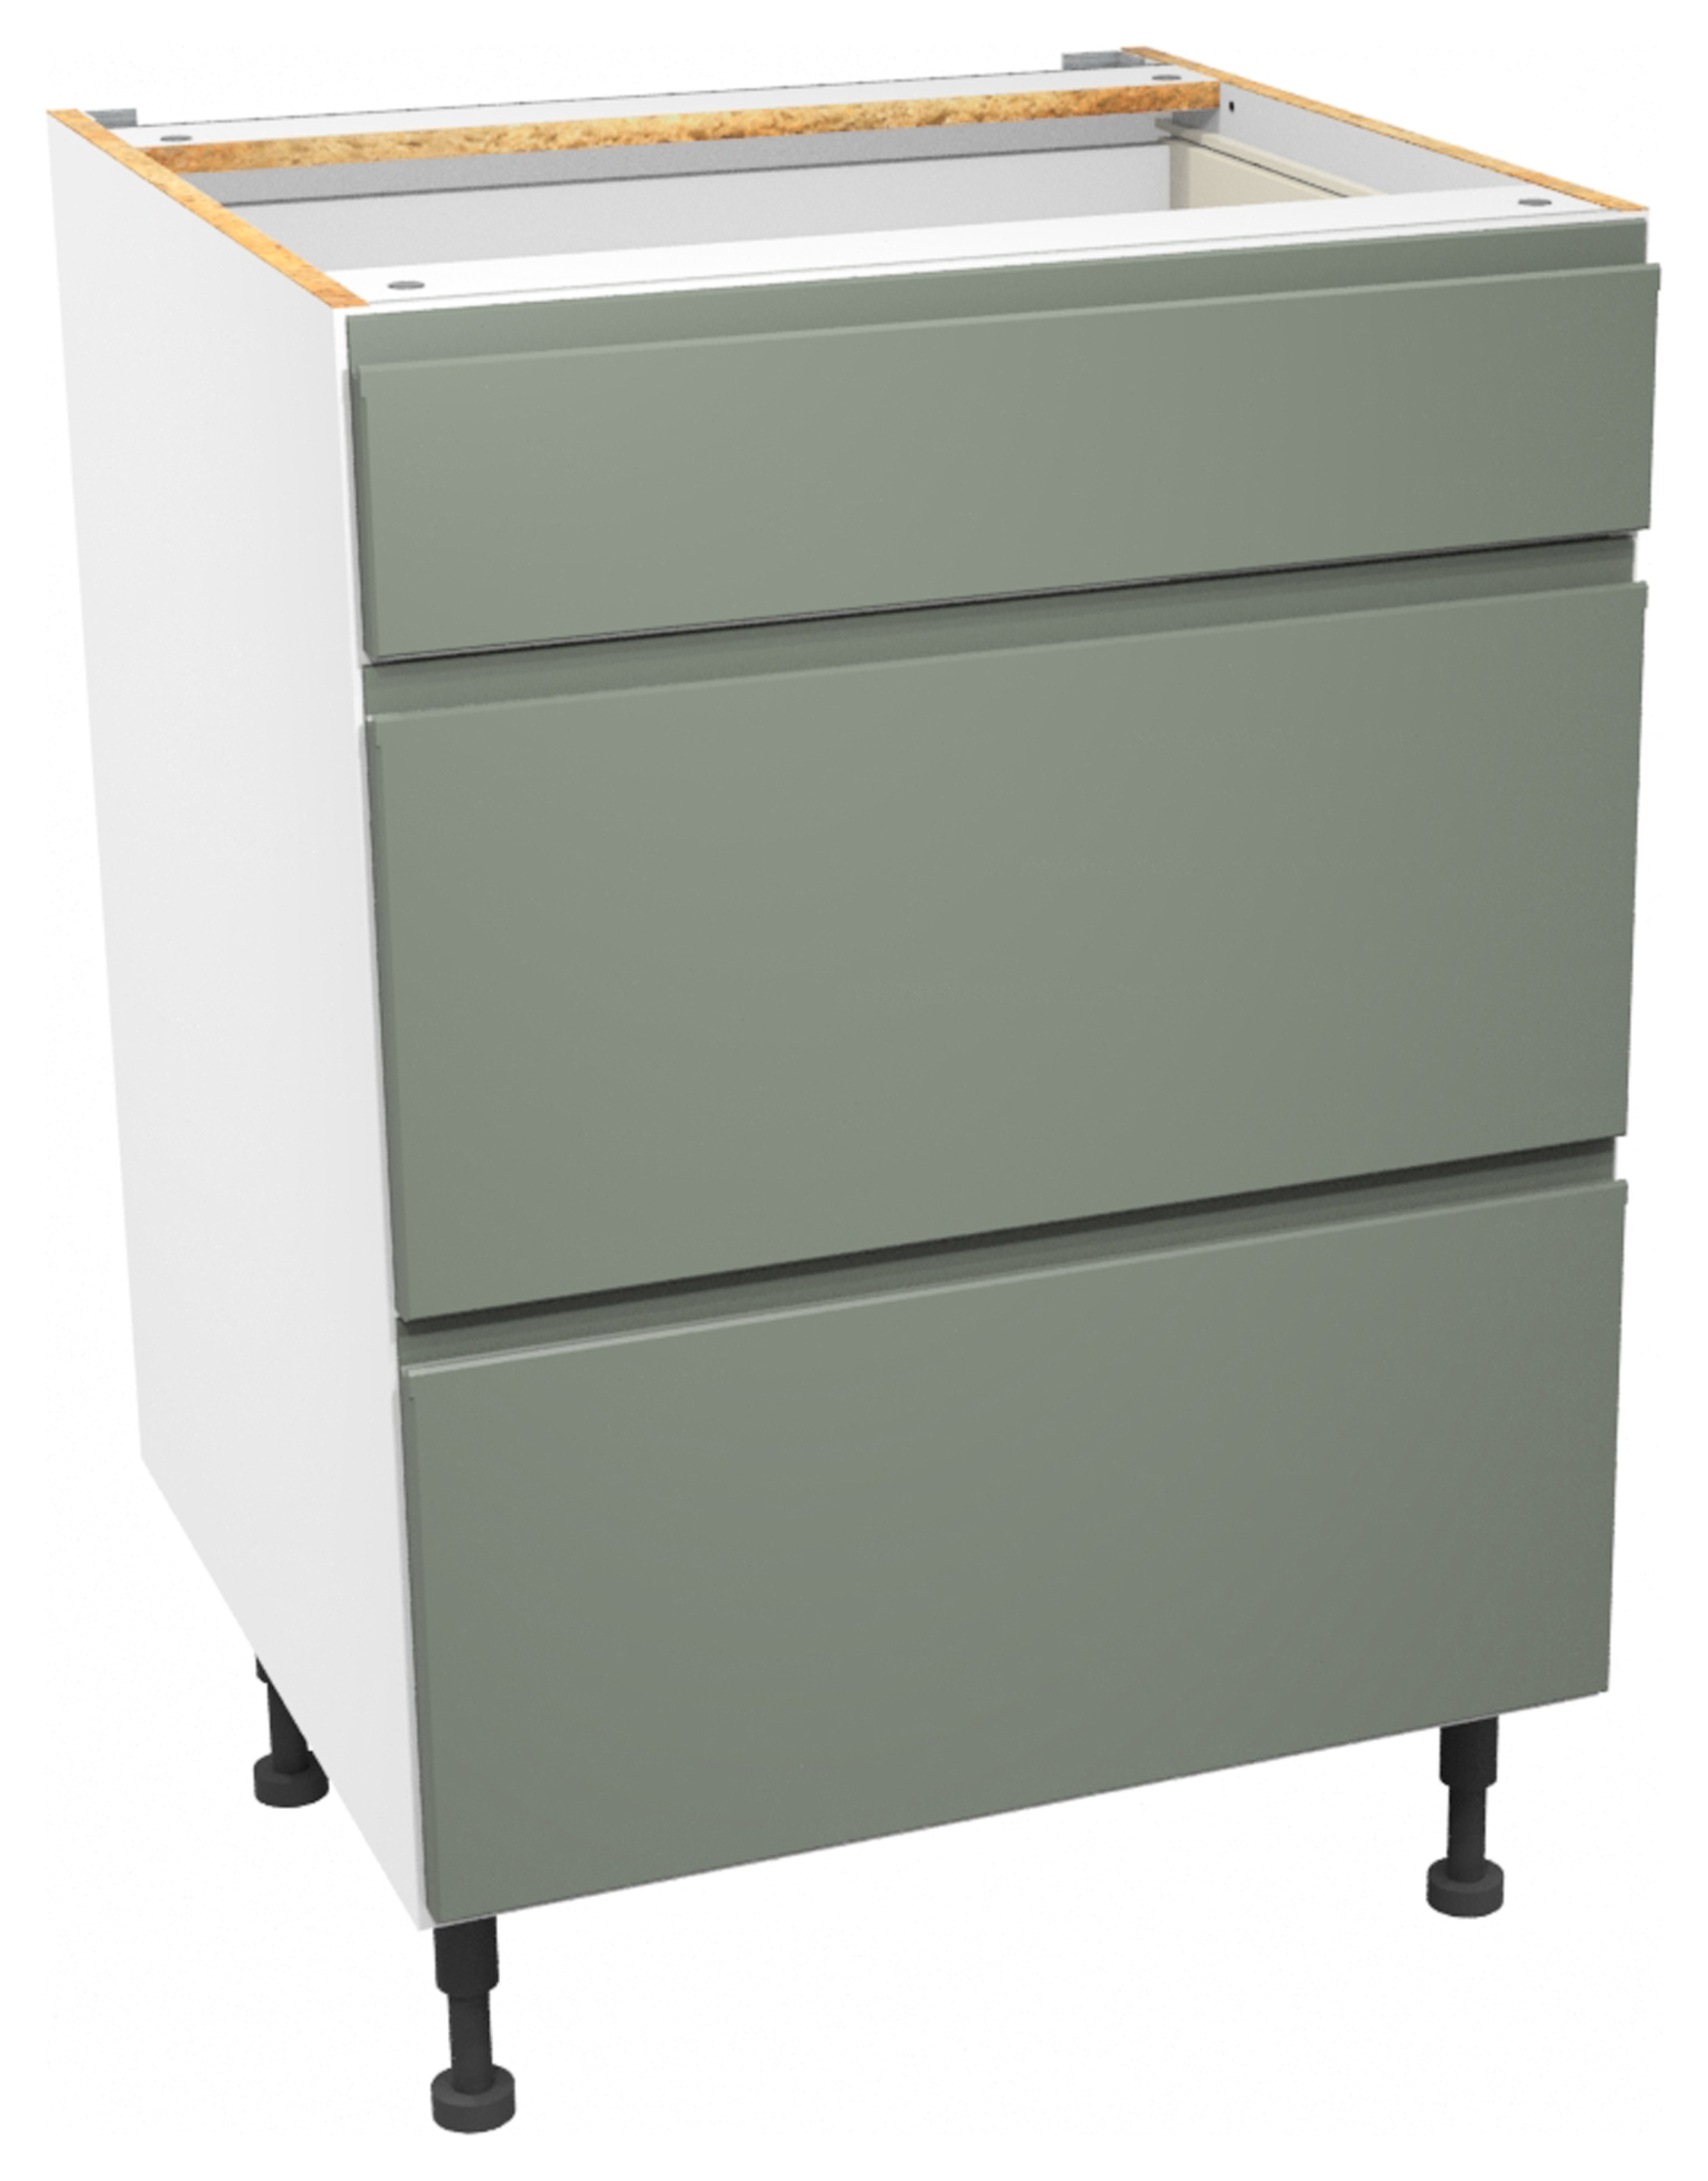 Image of Wickes Madison Reed Green Drawer Unit - 600mm